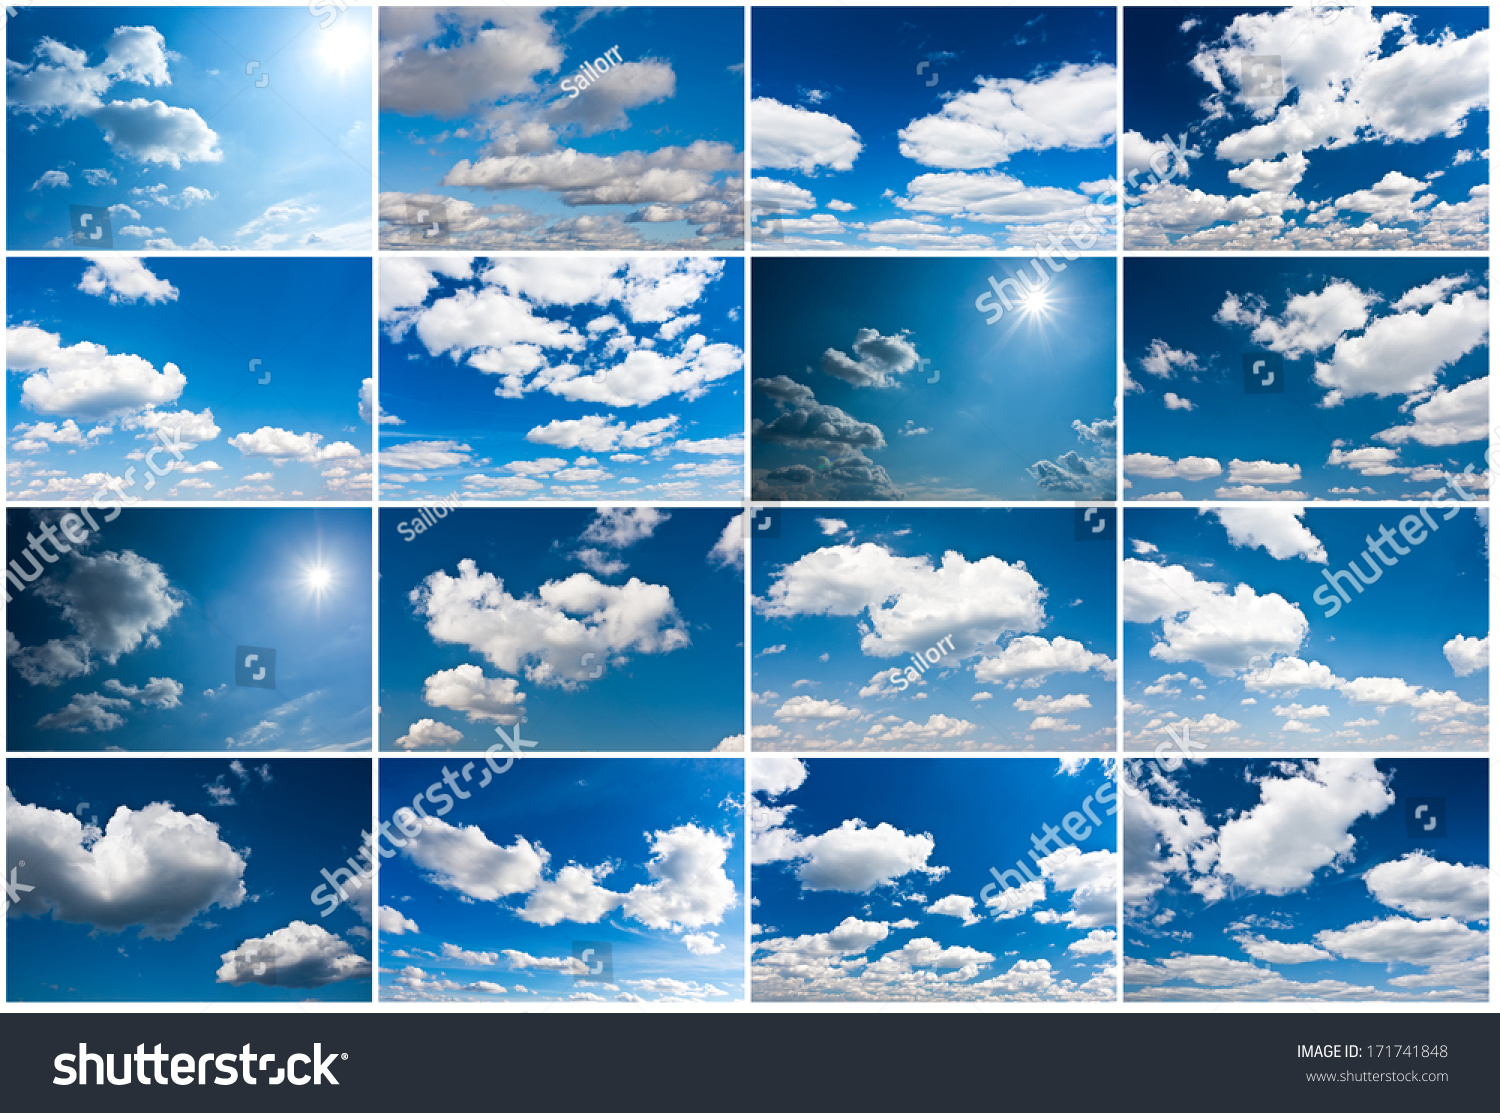 White clouds in blue summer sky background #171741848